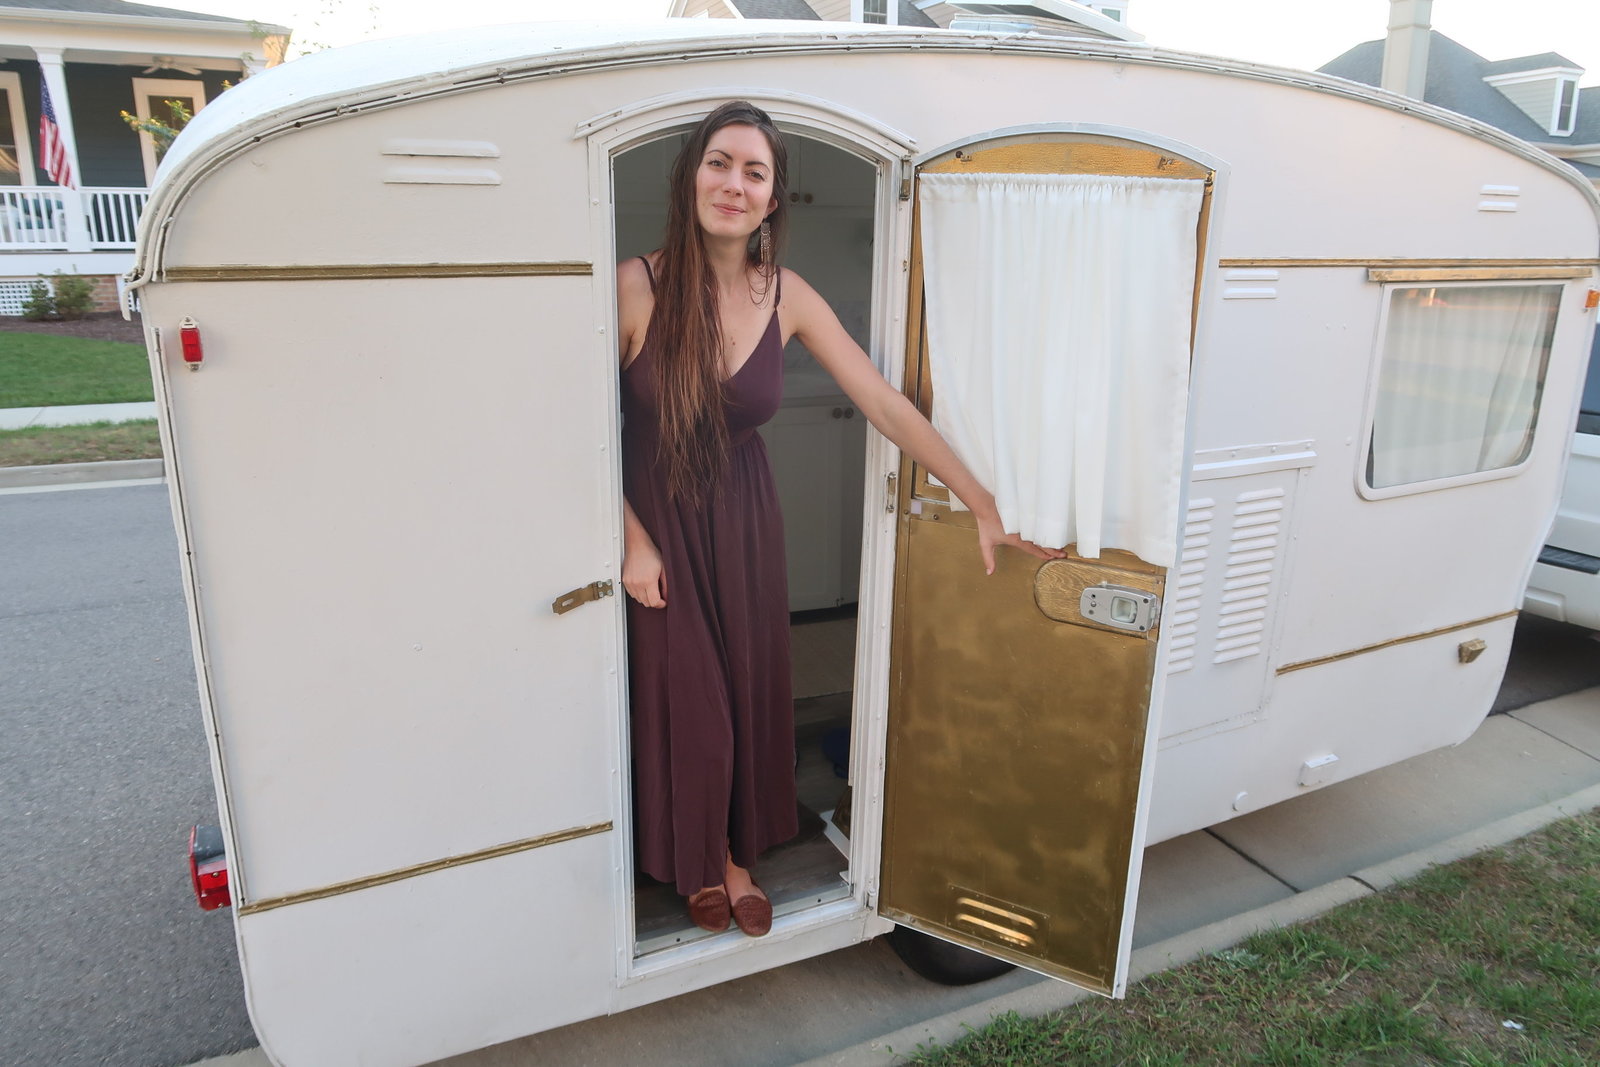 vintage-camper-classic-white-gold-reno-inspirations-ideas-boho-gypsy-hippy-pearl-musician-singer-songwriter-interior1